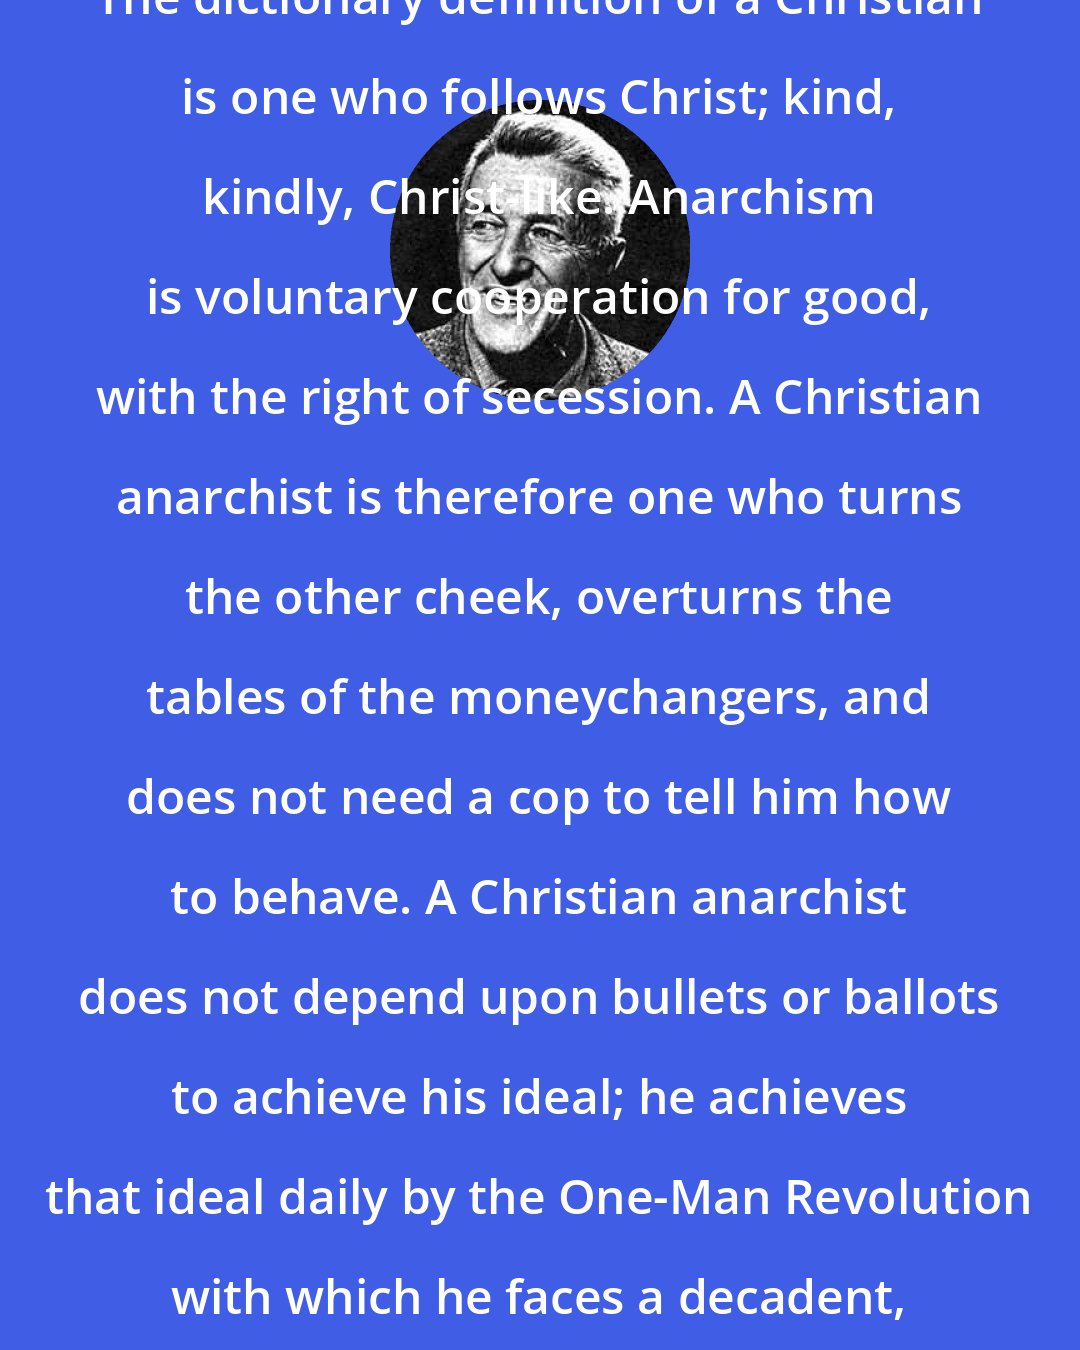 Ammon Hennacy: The dictionary definition of a Christian is one who follows Christ; kind, kindly, Christ-like. Anarchism is voluntary cooperation for good, with the right of secession. A Christian anarchist is therefore one who turns the other cheek, overturns the tables of the moneychangers, and does not need a cop to tell him how to behave. A Christian anarchist does not depend upon bullets or ballots to achieve his ideal; he achieves that ideal daily by the One-Man Revolution with which he faces a decadent, confused, and dying world.